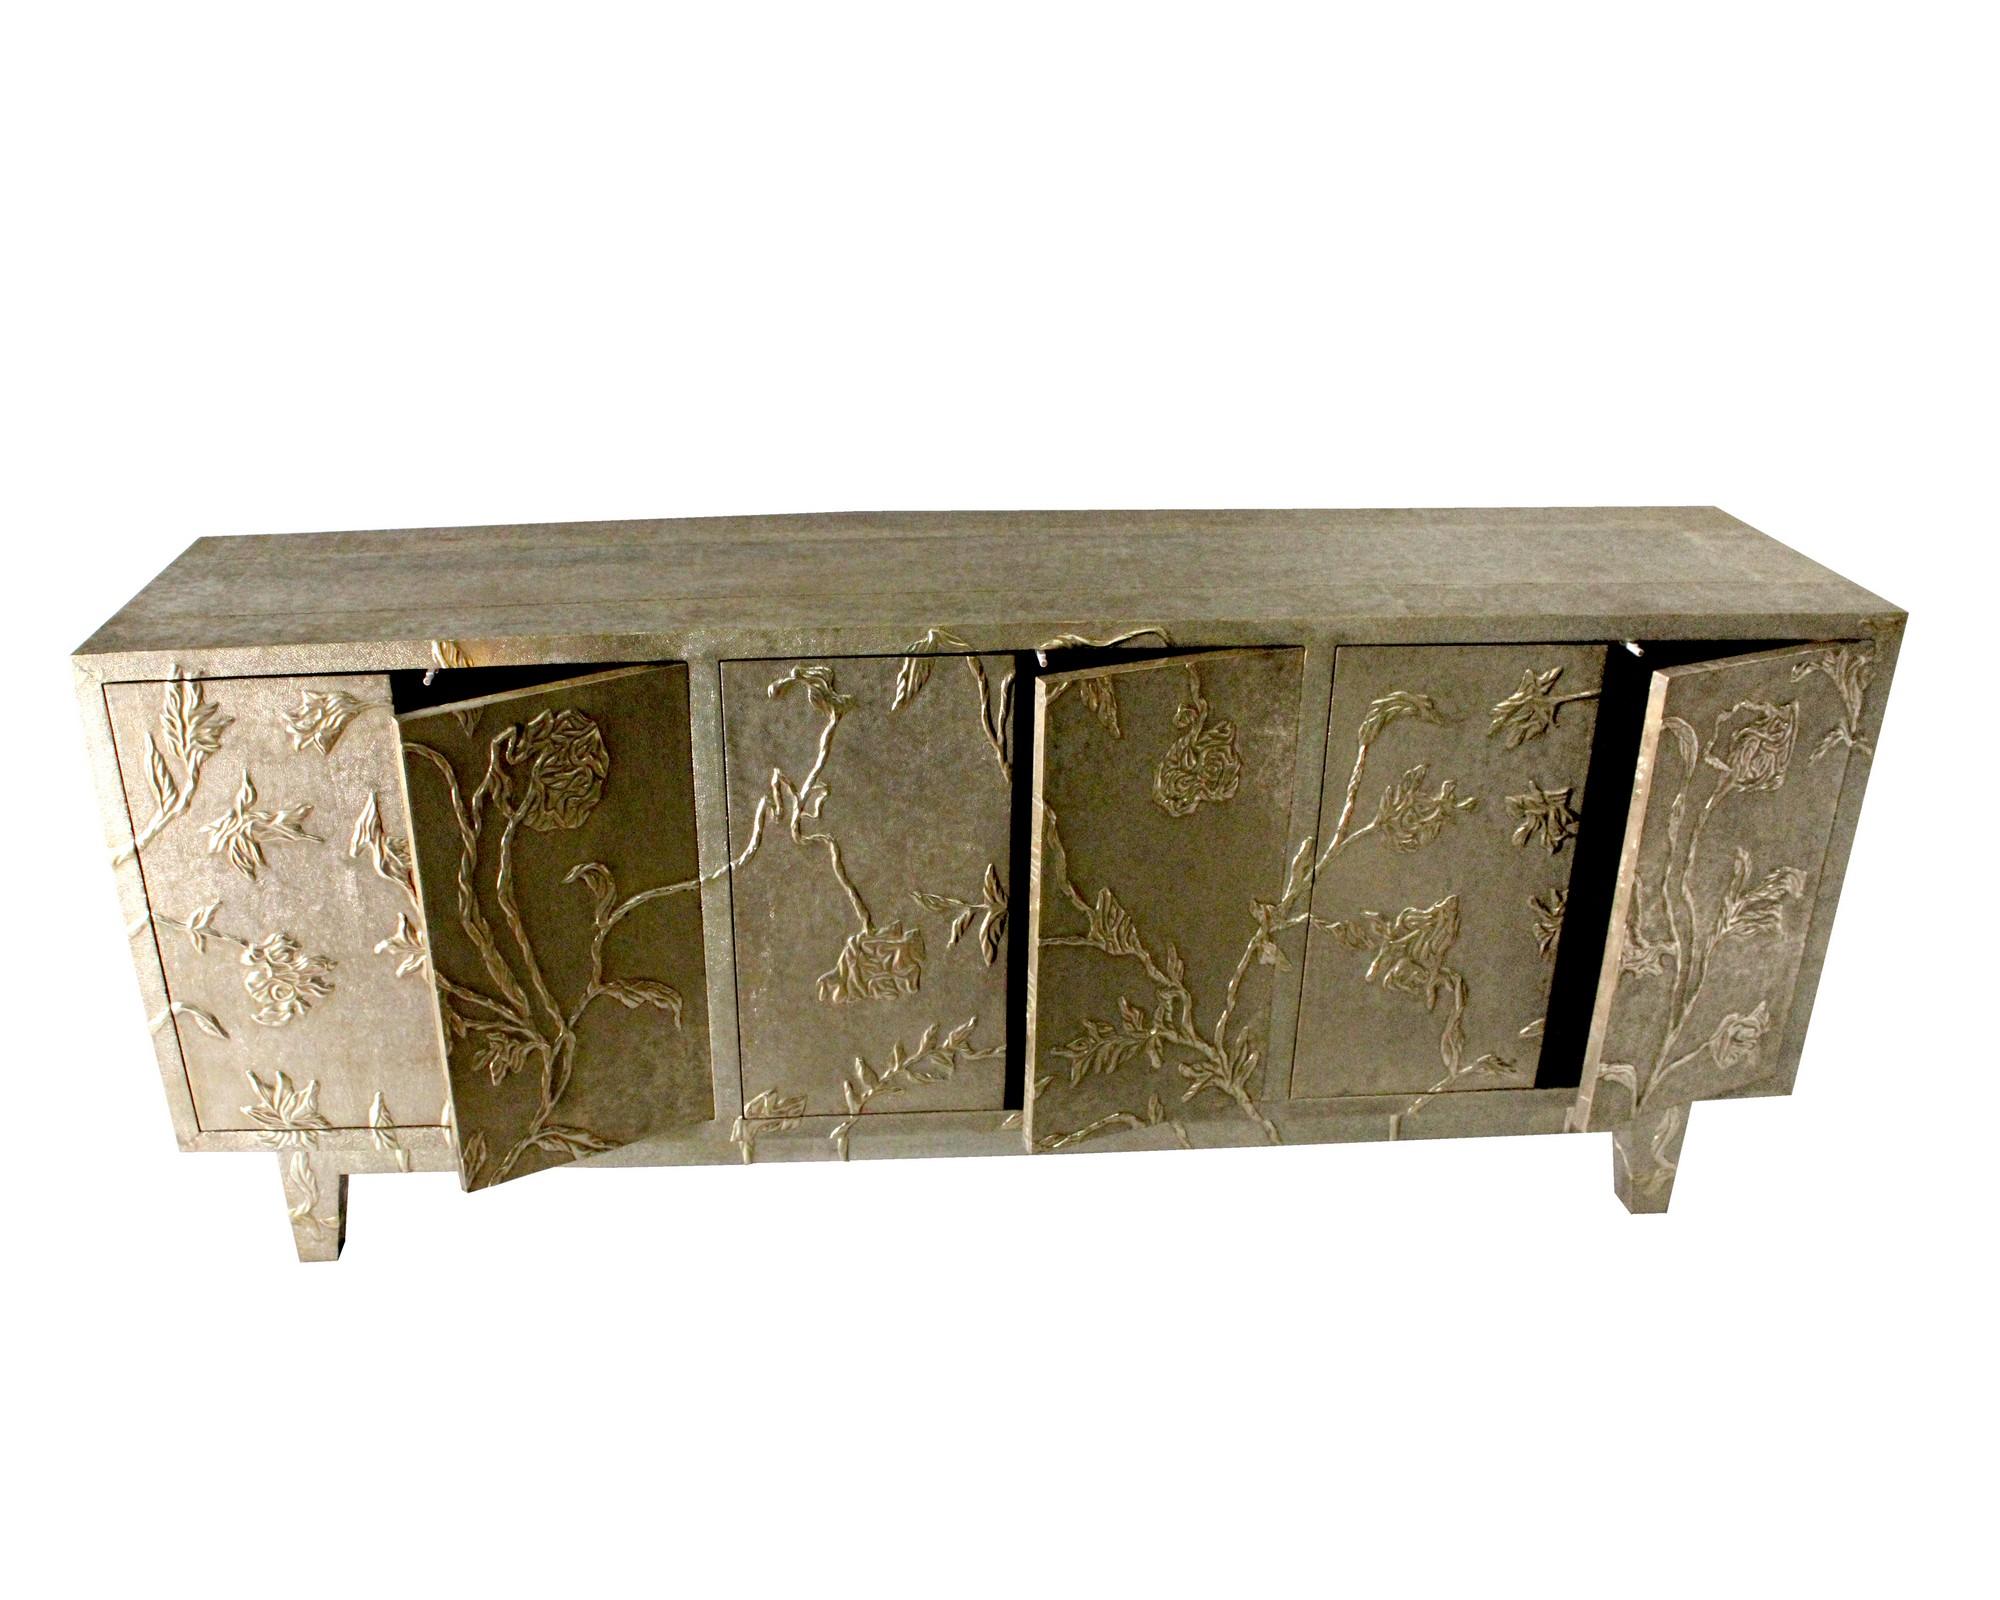 Carved Modern Credenza Sideboard in Floral Brass Clad, Handmade in India by S. Odegard For Sale